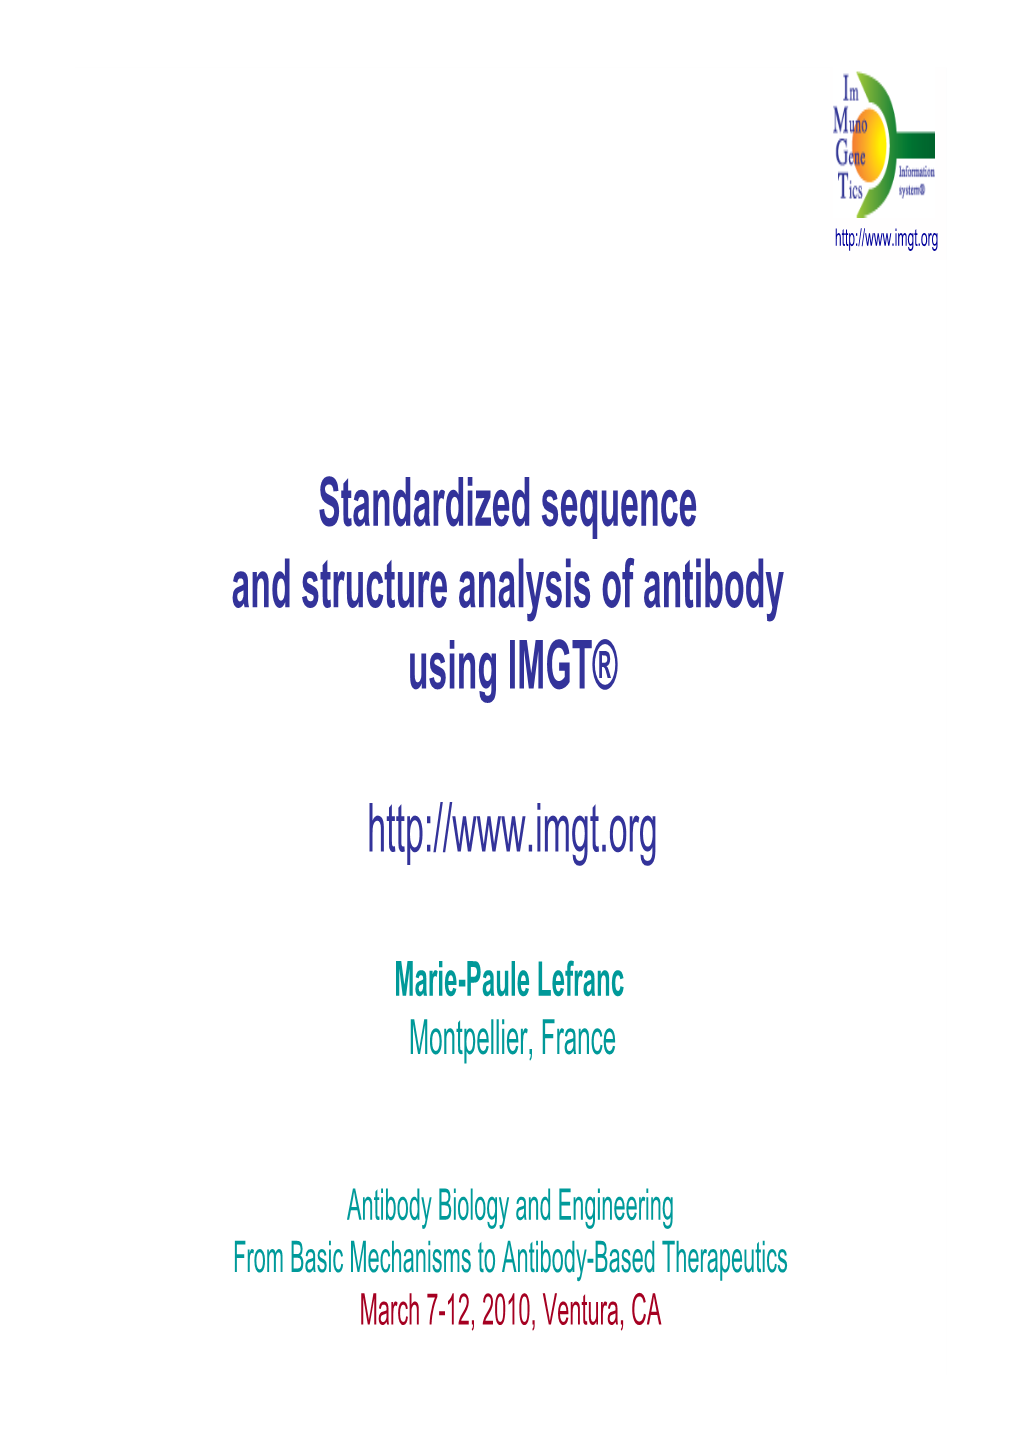 Standardized Sequence and Structure Analysis of Antibody Using IMGT®